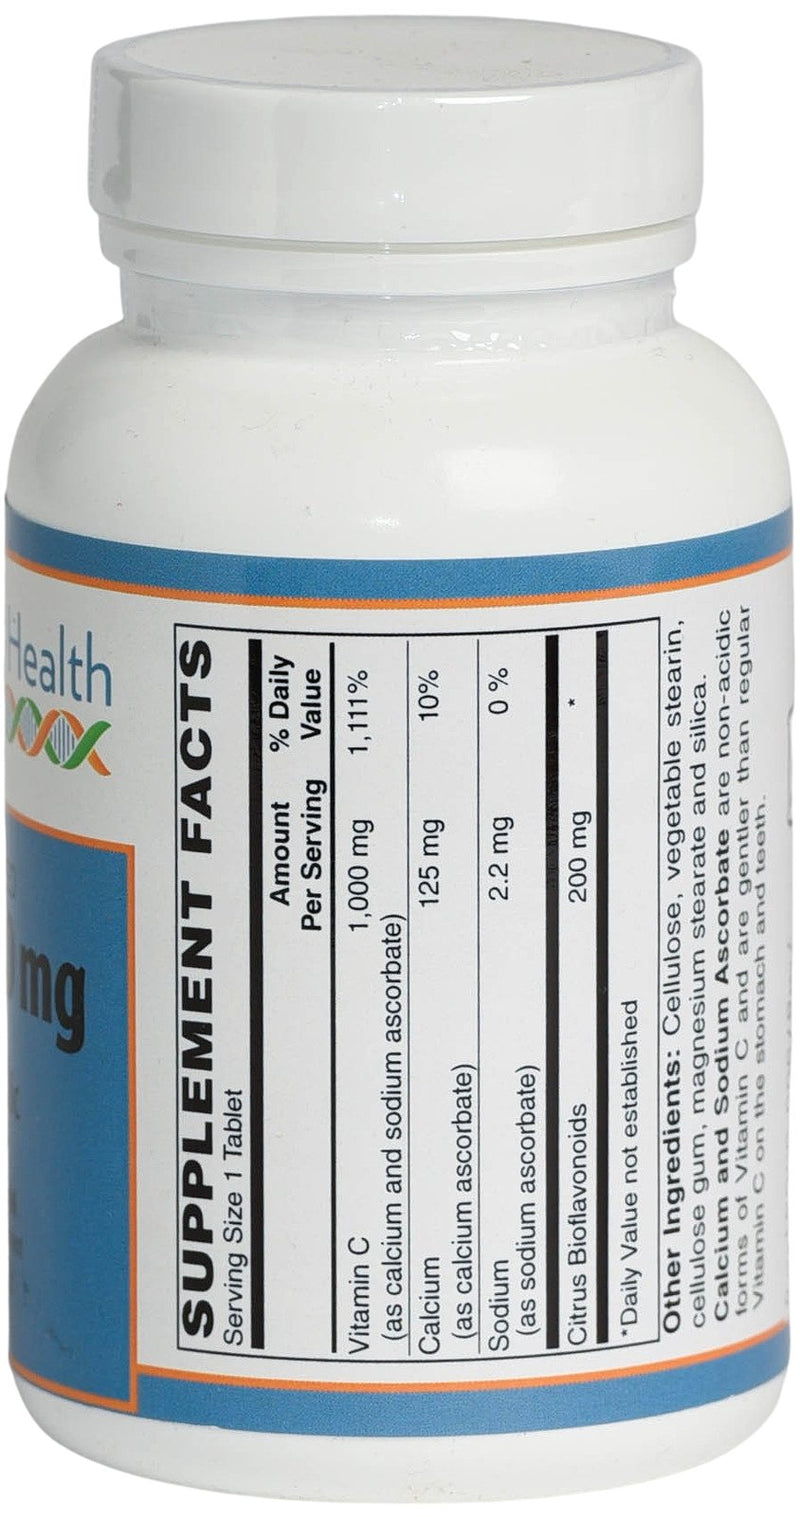 Load image into Gallery viewer, Solutions 4 Health Buffered Vitamin C-1000MG Product Label
